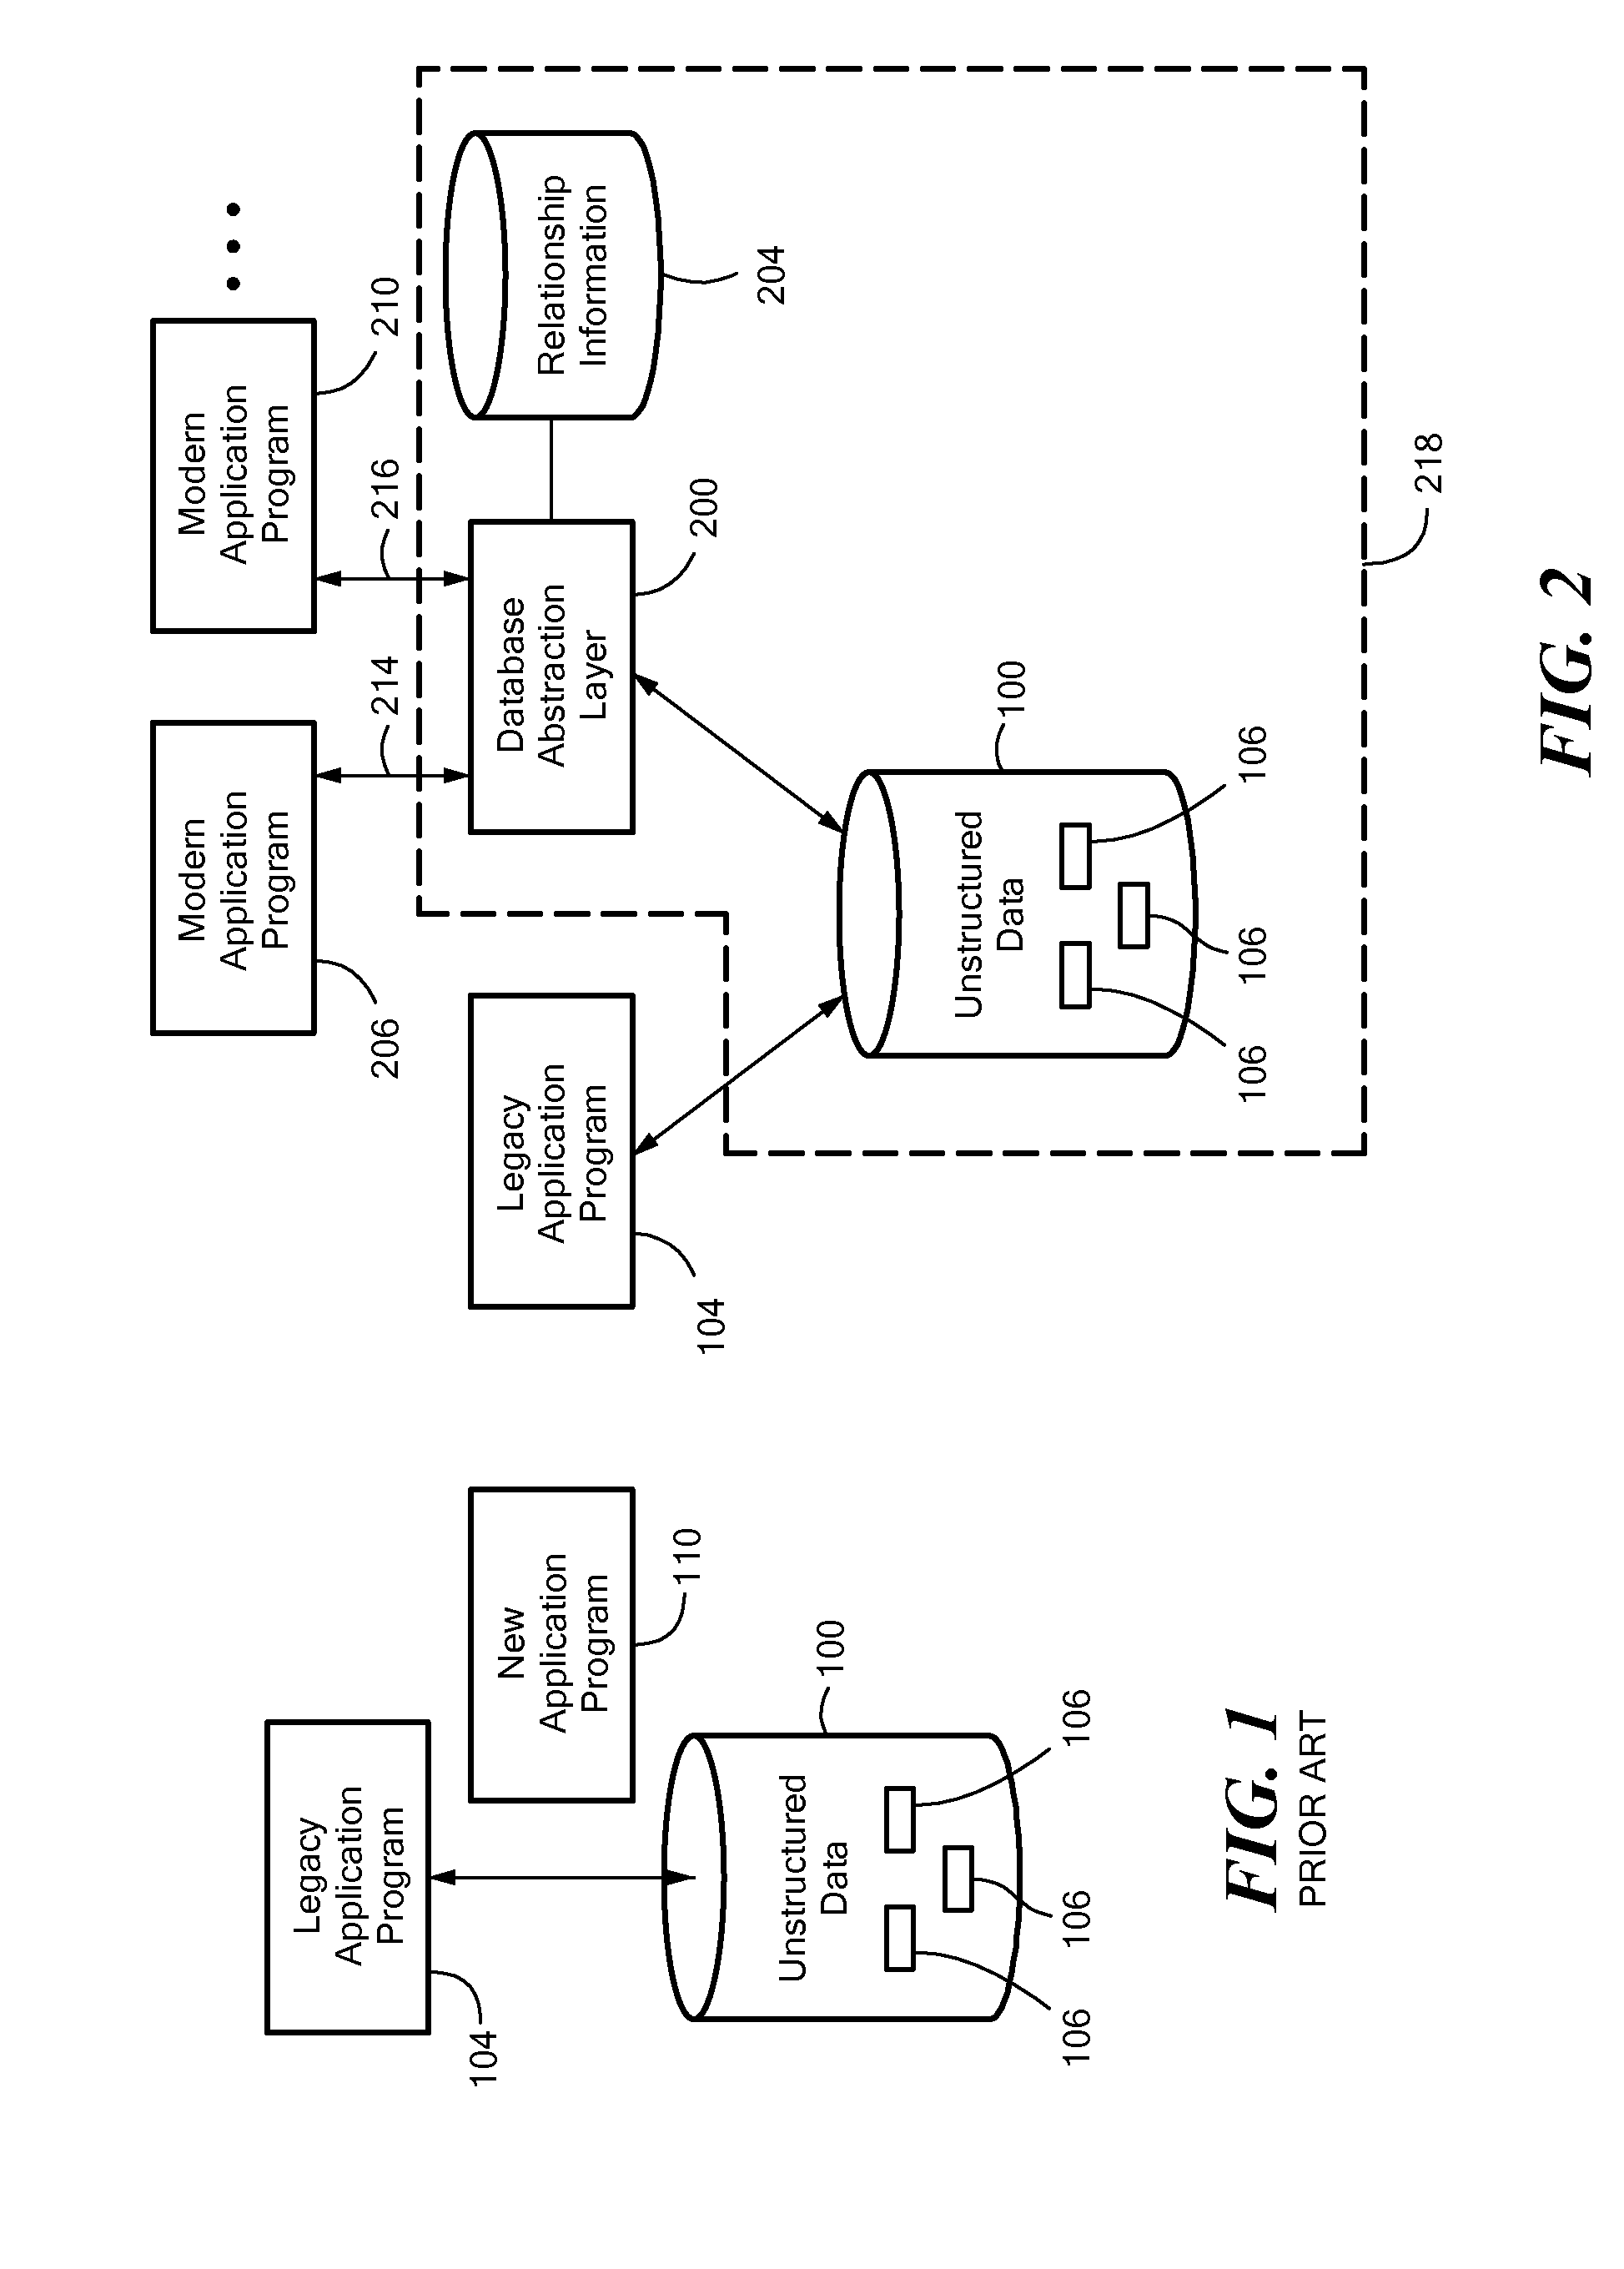 Apparatus and Method for Constructing Data Applications in an Unstructured Data Environment